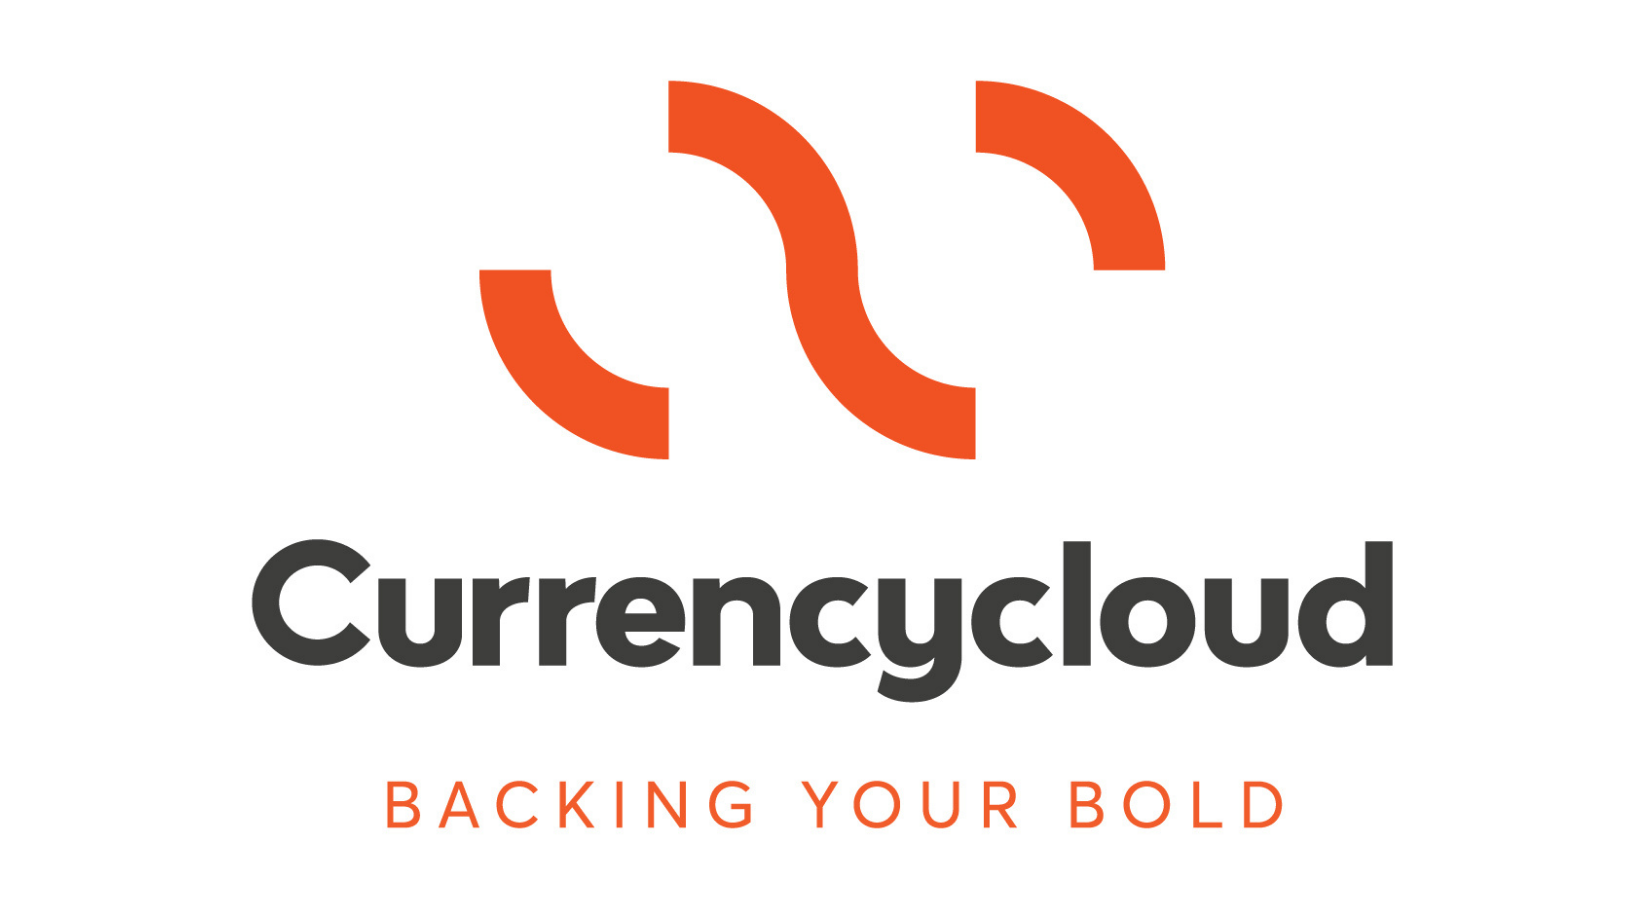 Currencycloud Hires Industry Heavyweights for COO & CTO Roles Following Strong H1 Growth 